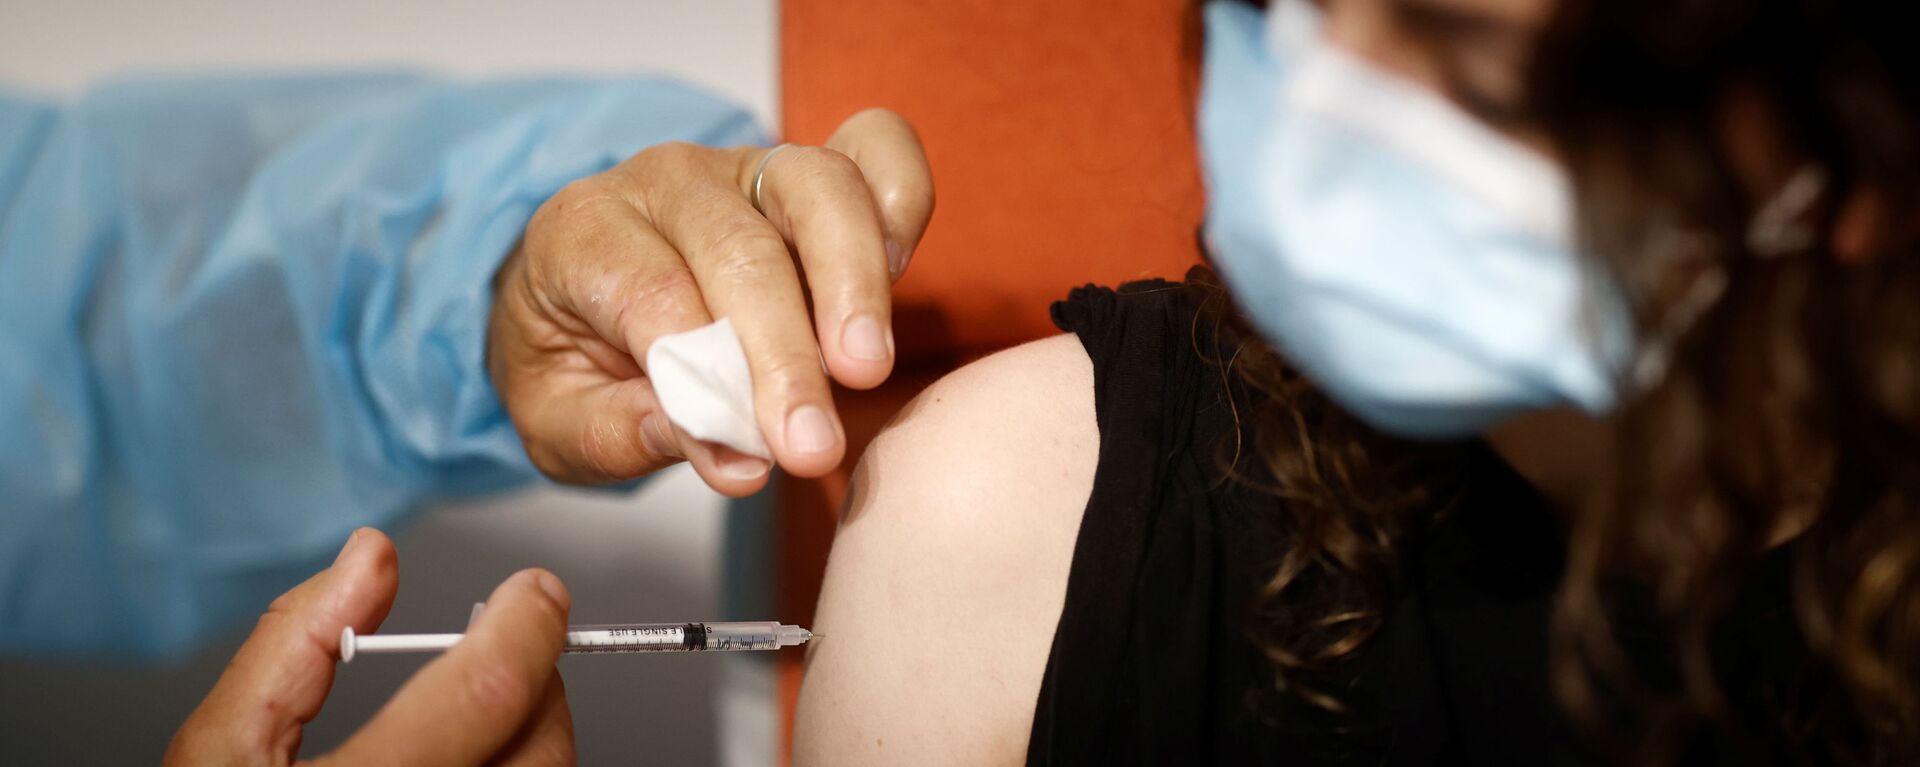 A medical worker administers a dose of the Comirnaty Pfizer BioNTech COVID-19 vaccine in a vaccination center in Nantes as part of the coronavirus disease (COVID-19) vaccination campaign in France, June 3, 2021 - Sputnik International, 1920